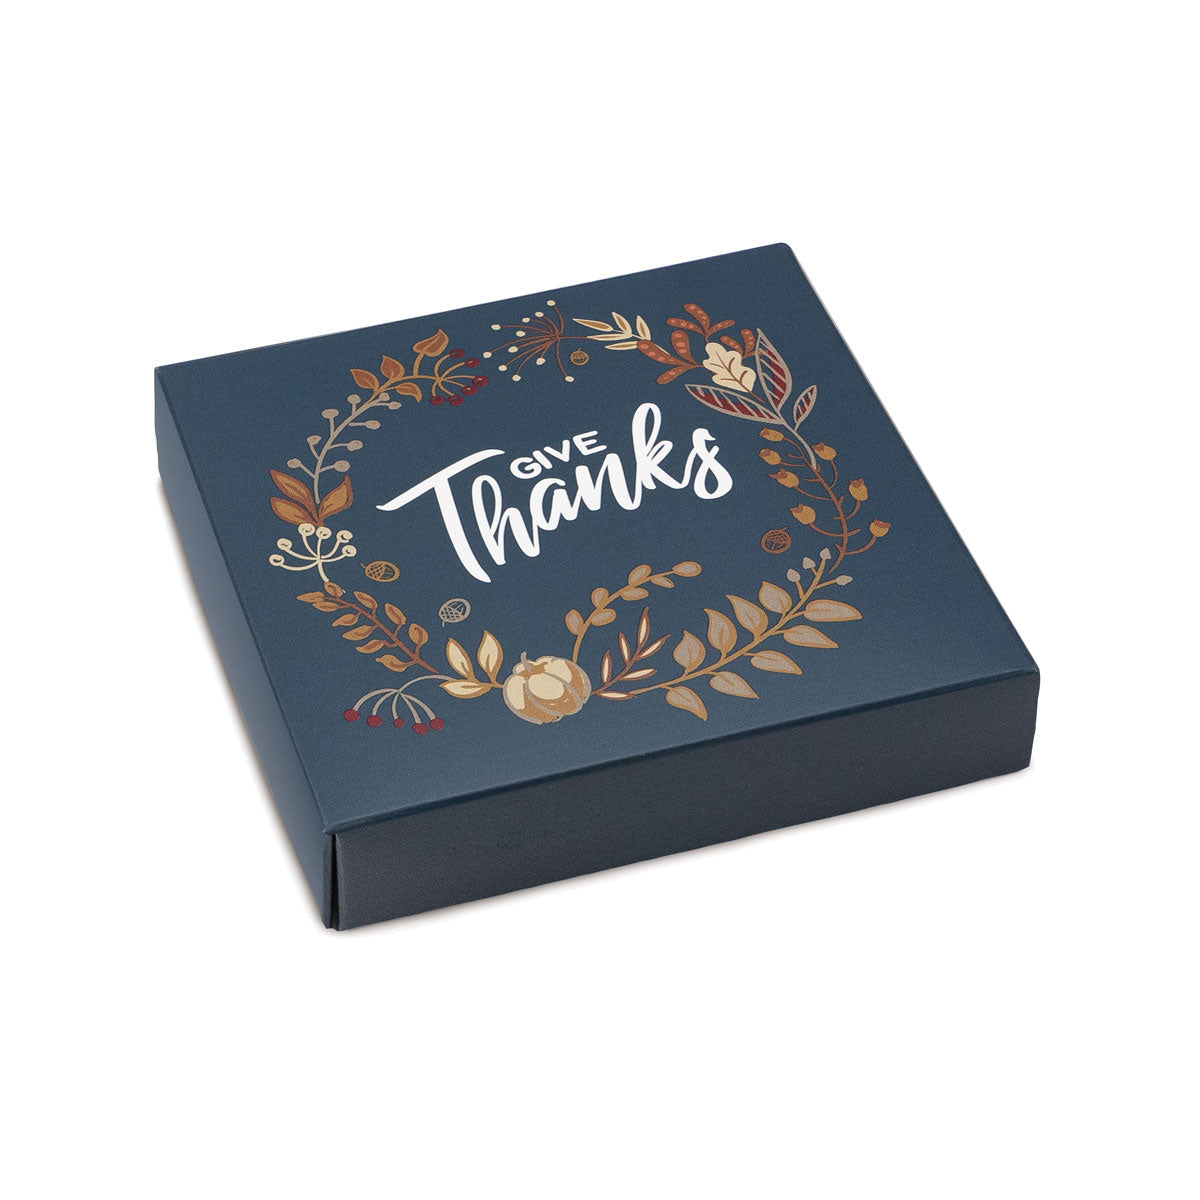 Give Thanks Themed Box Cover for 9 Piece Holiday Assortment